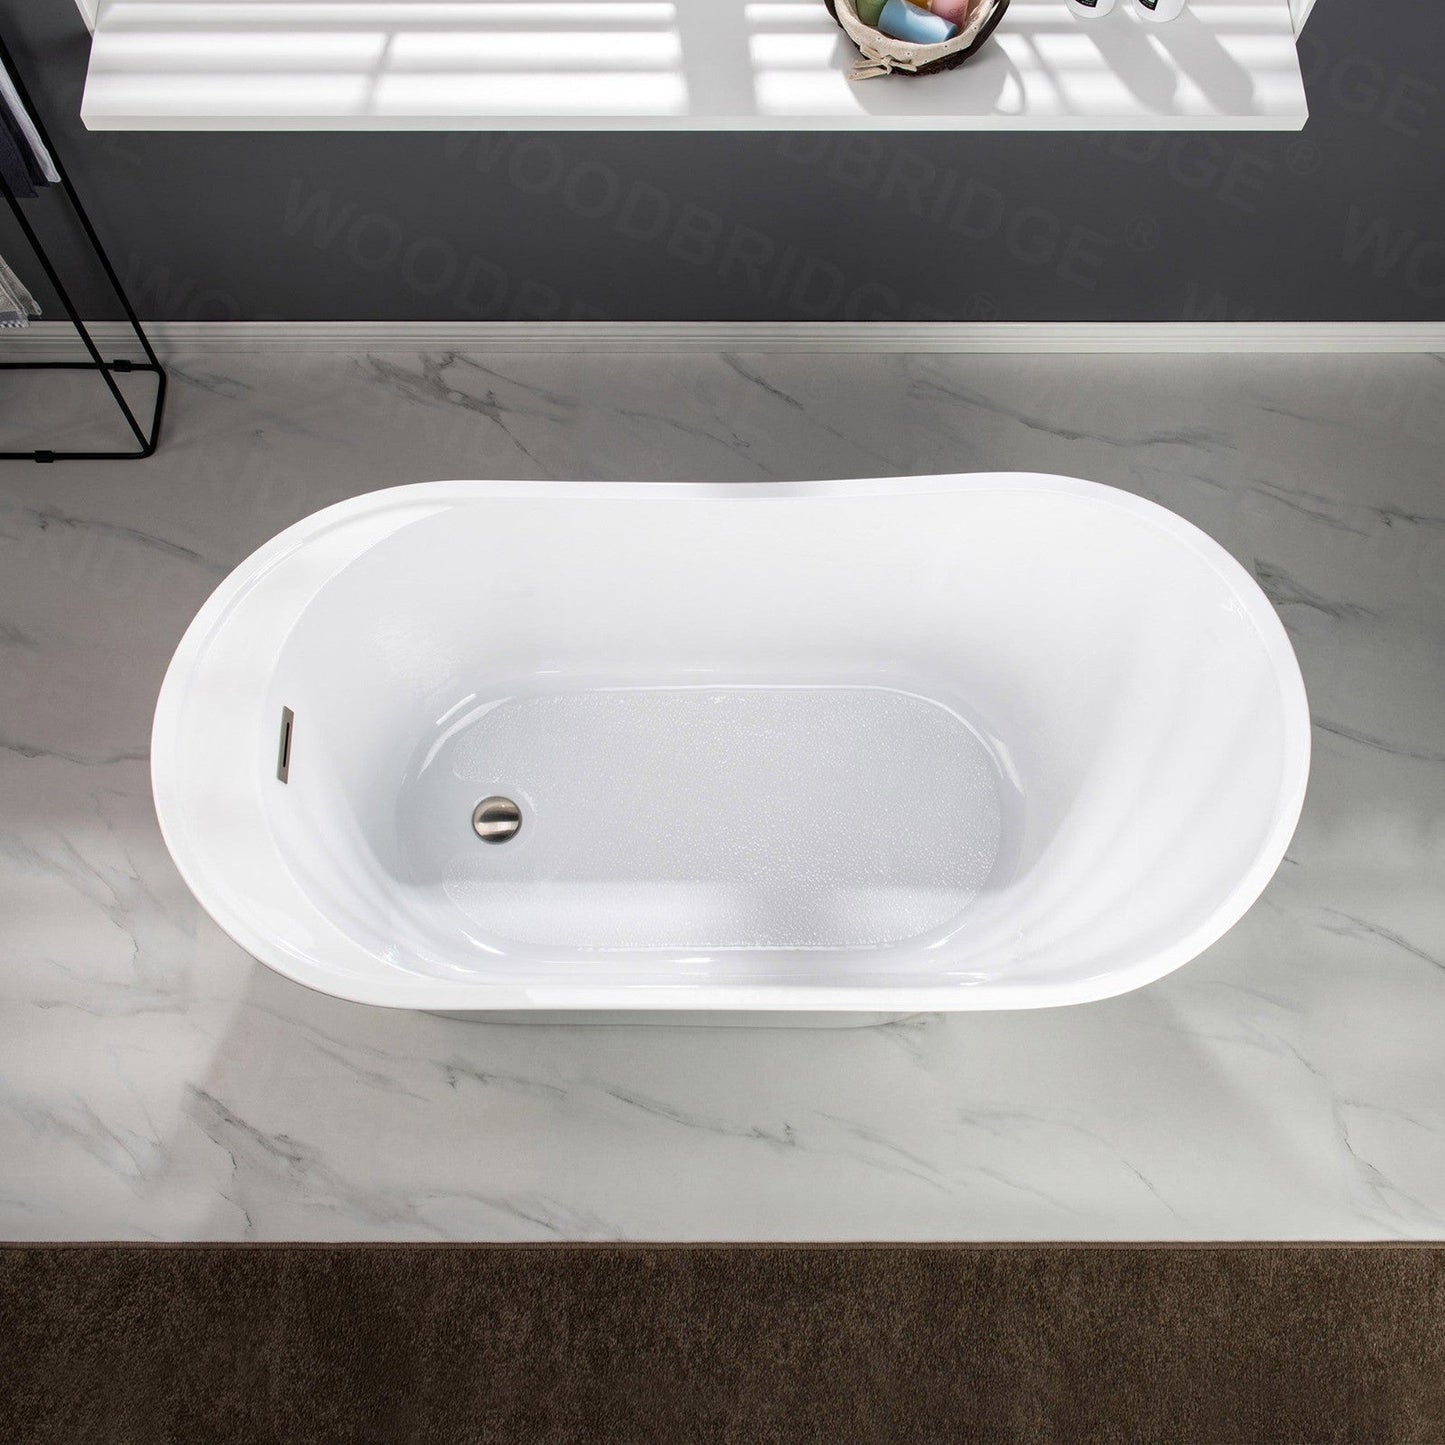 WoodBridge B0084 67" White Acrylic Freestanding Soaking Bathtub With Brushed Nickel Drain, Overflow, F0070BNVT Tub Filler and Caddy Tray